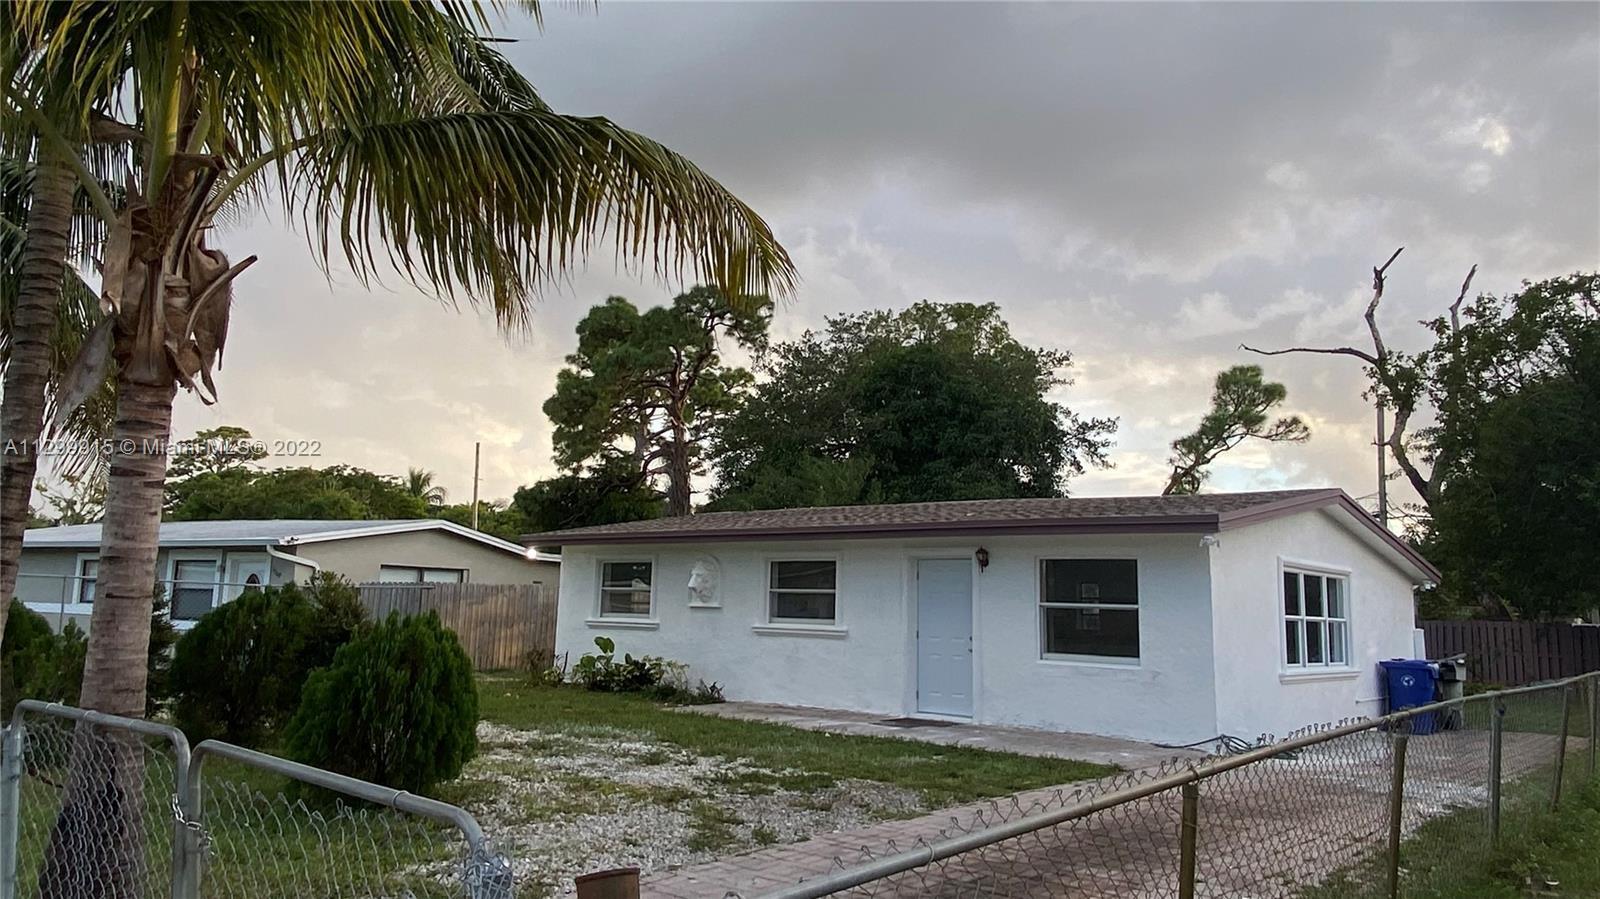 Look no further this is a great invest opportunity to buy a remodeled 3 bedroom 1 bath home less tha